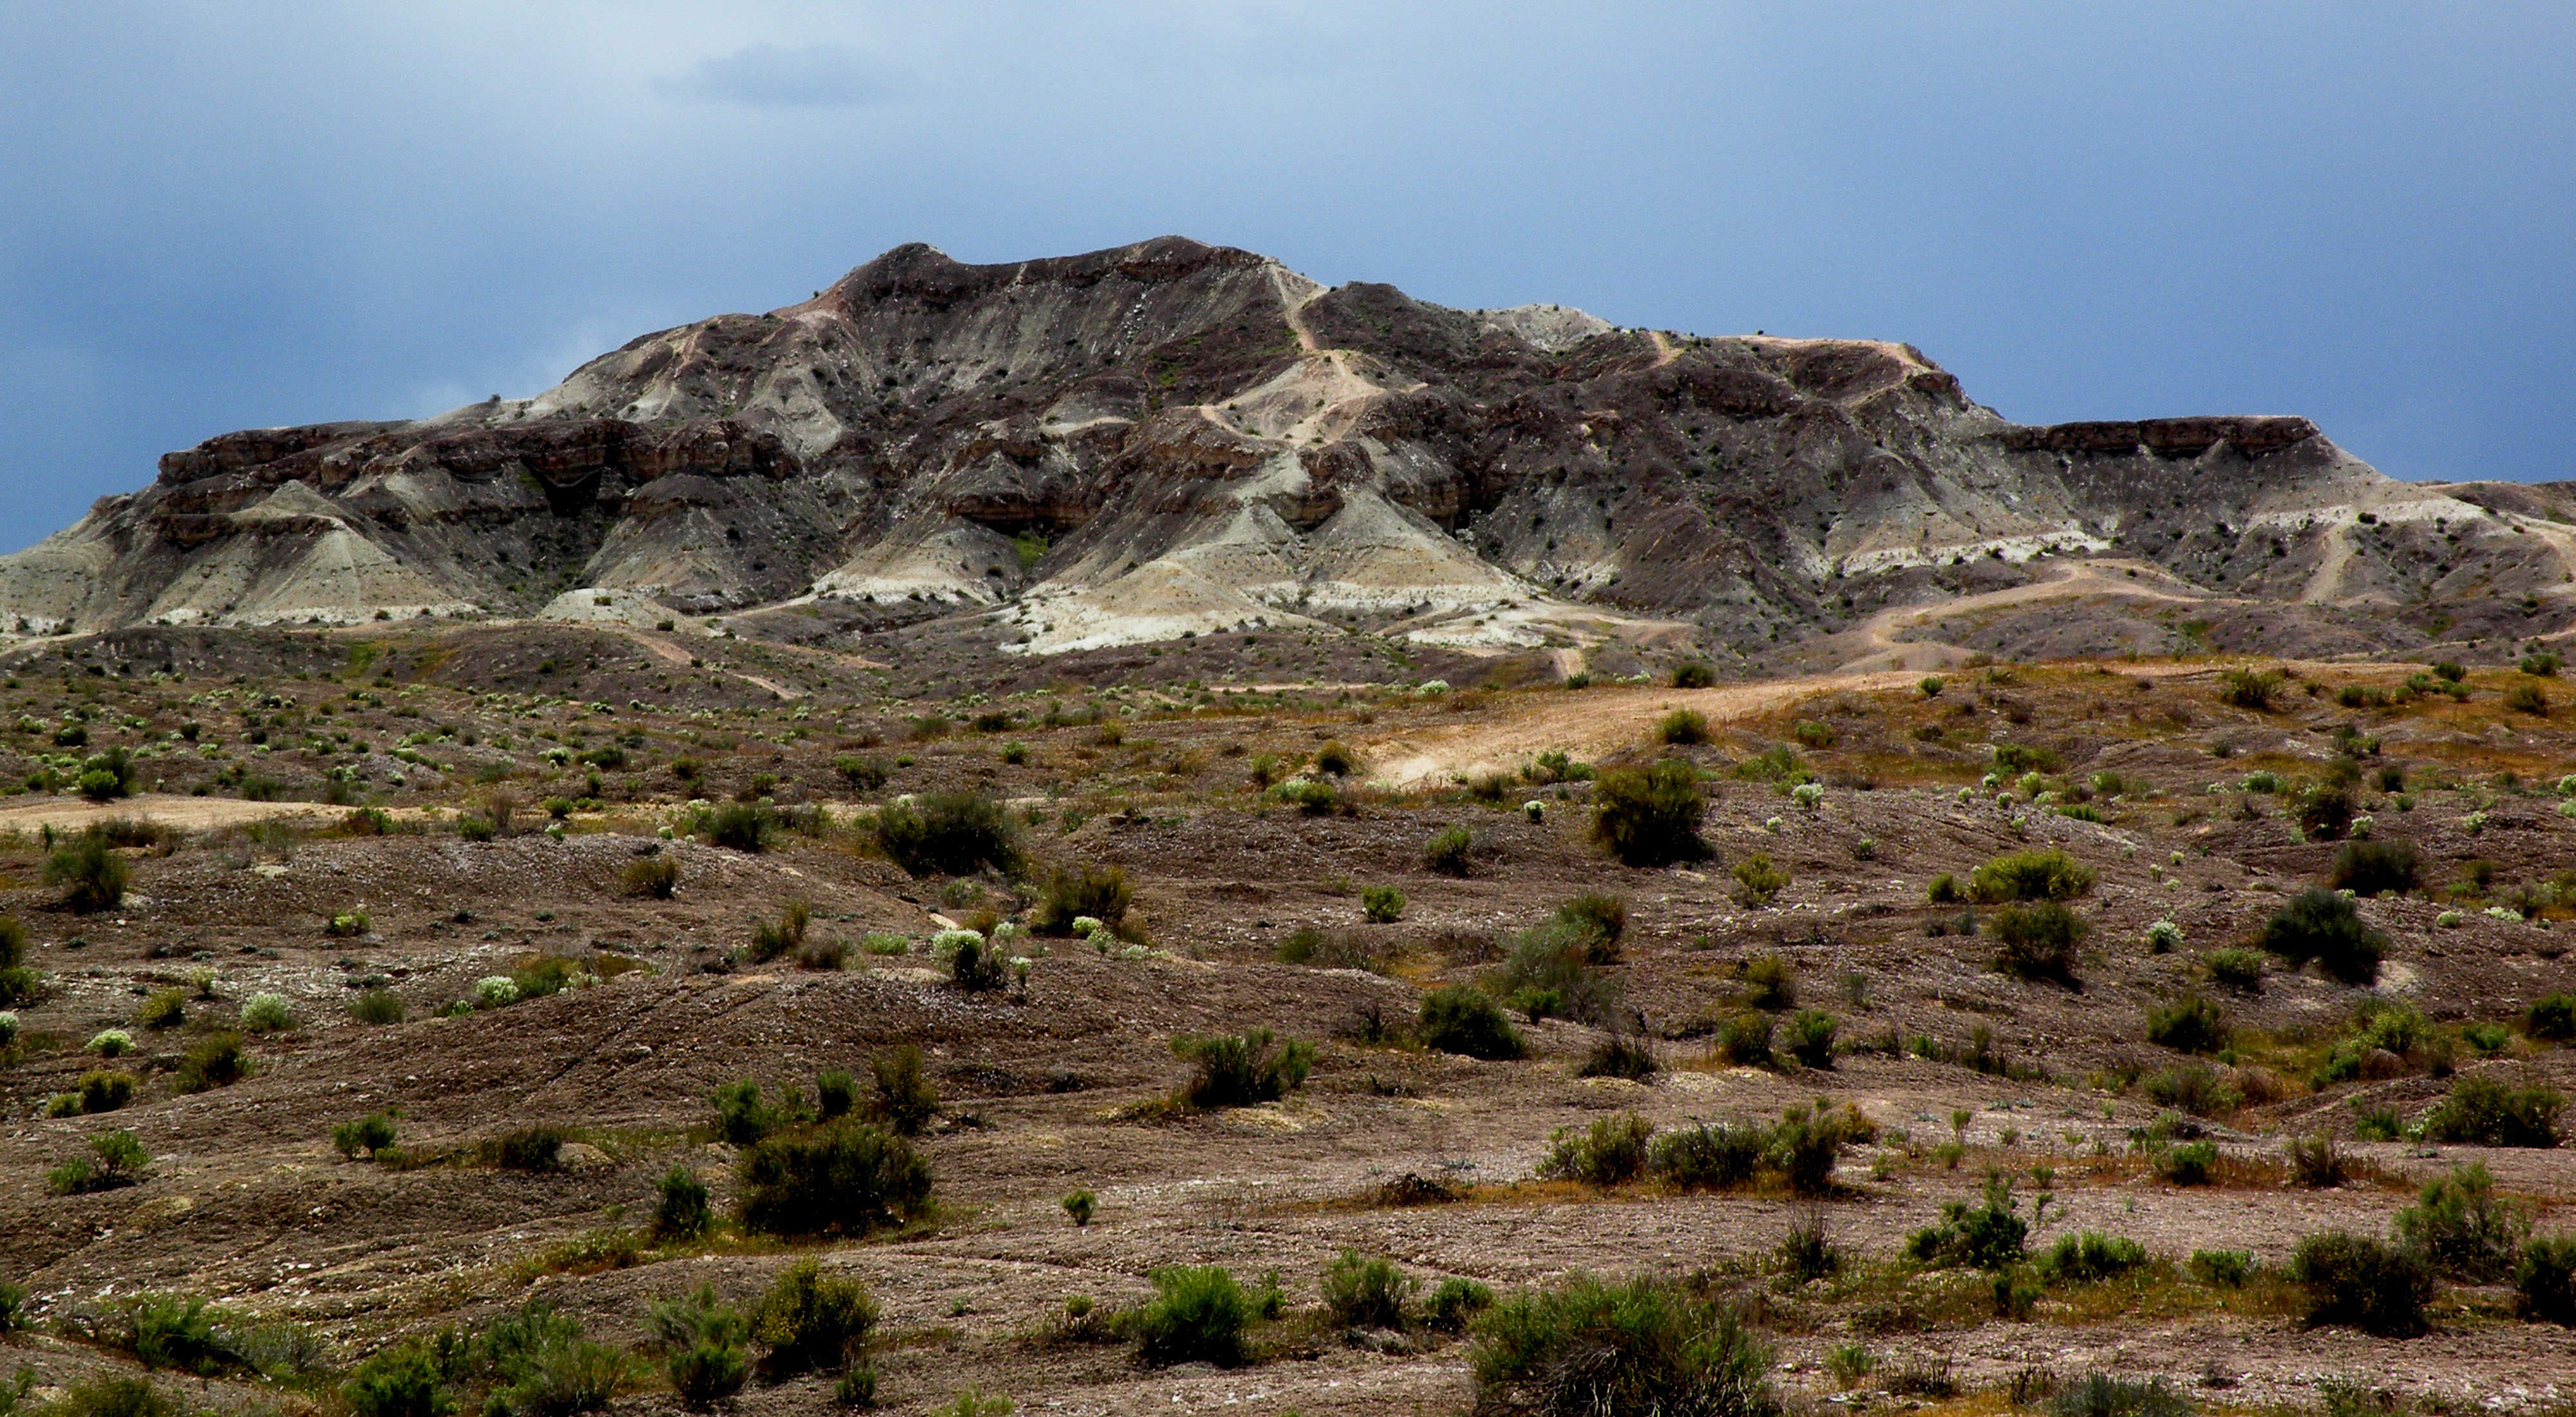 Landscape view of brown scrubby hills leading up to a large brown rock formation in the distance.